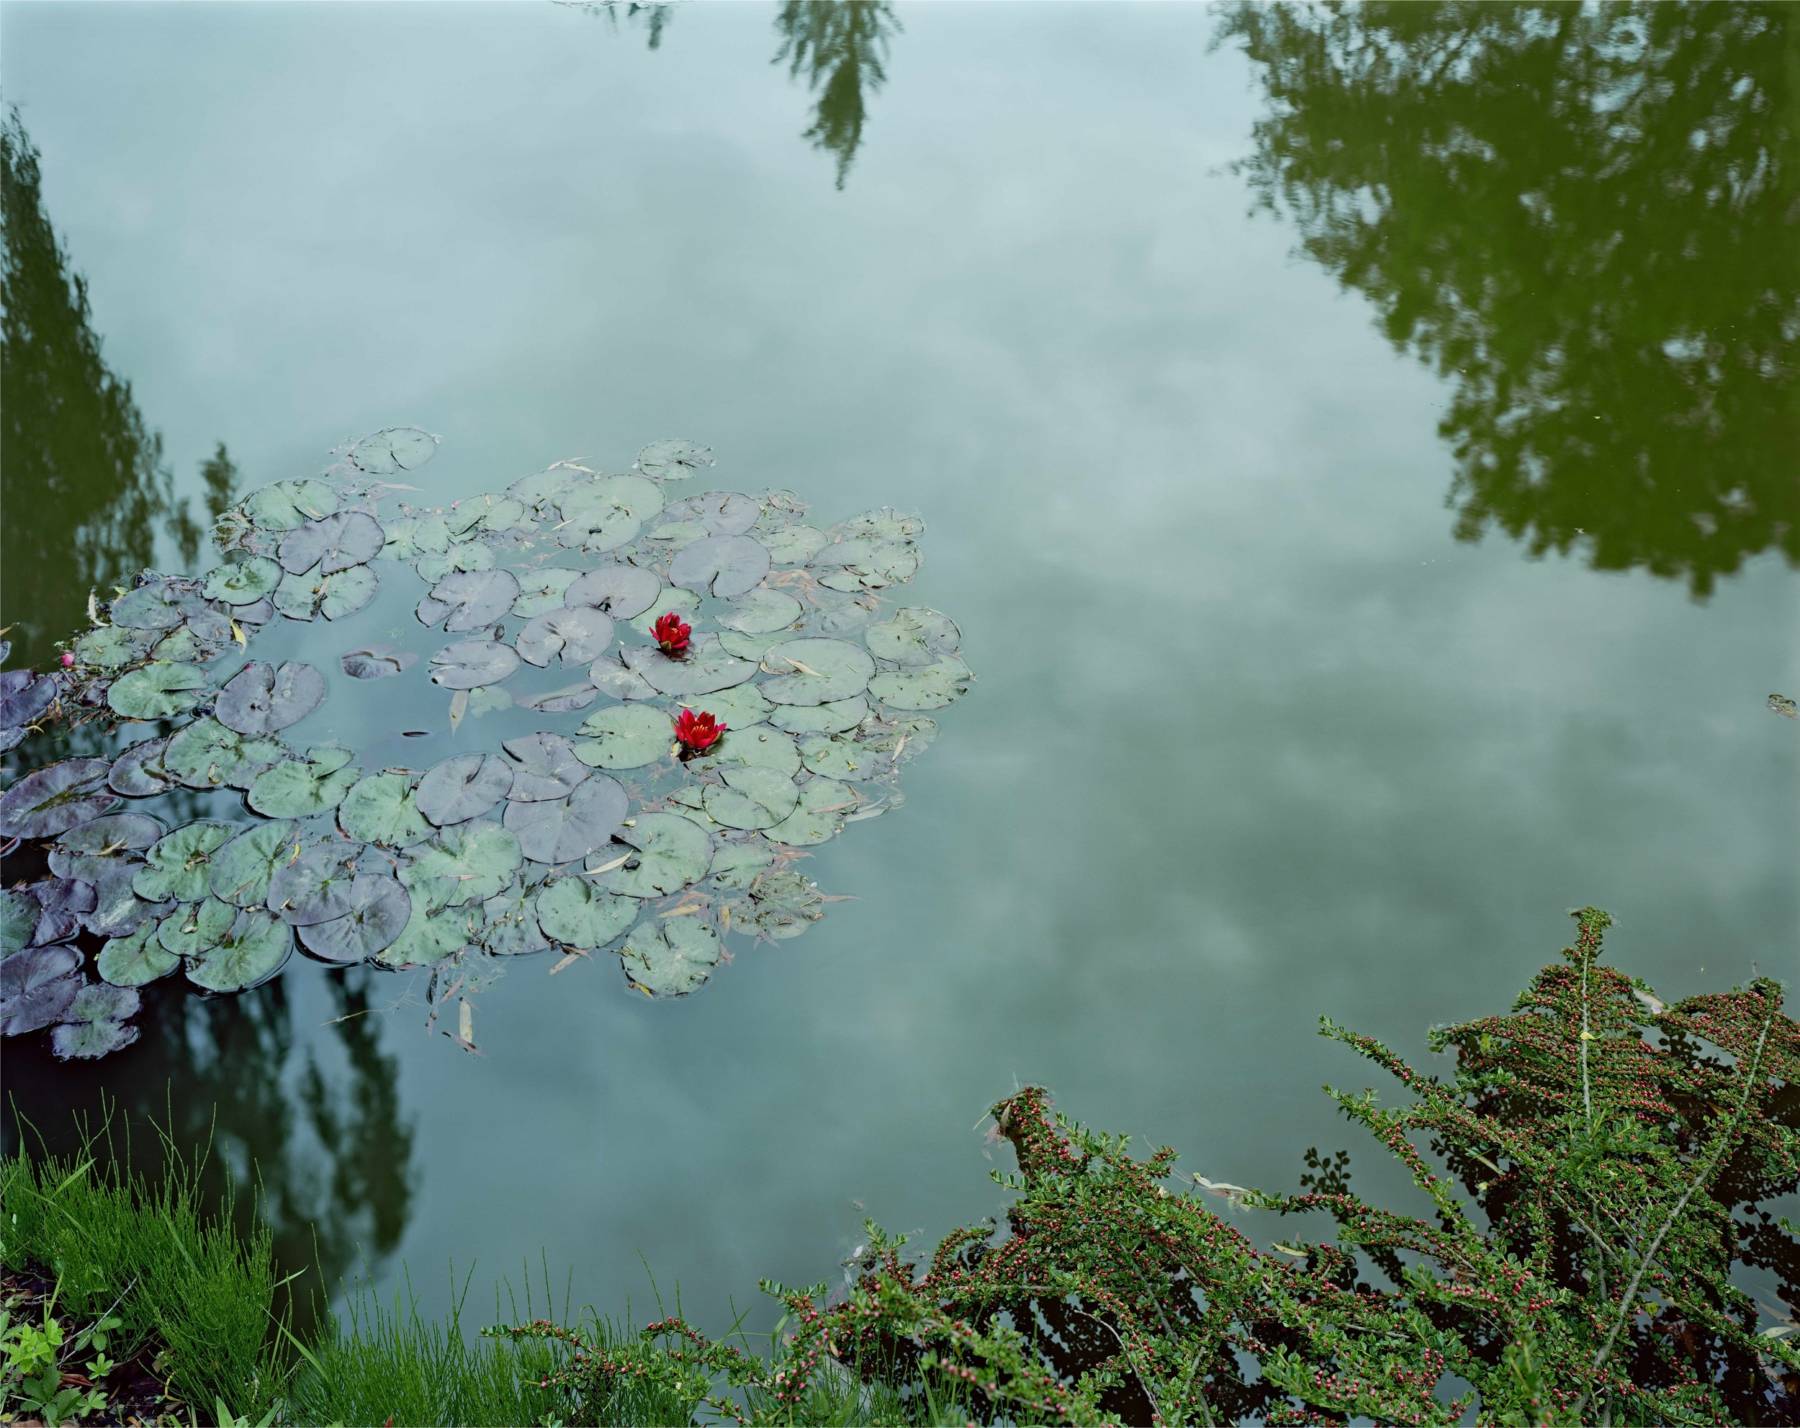 Stephen Shore, Giverny, France